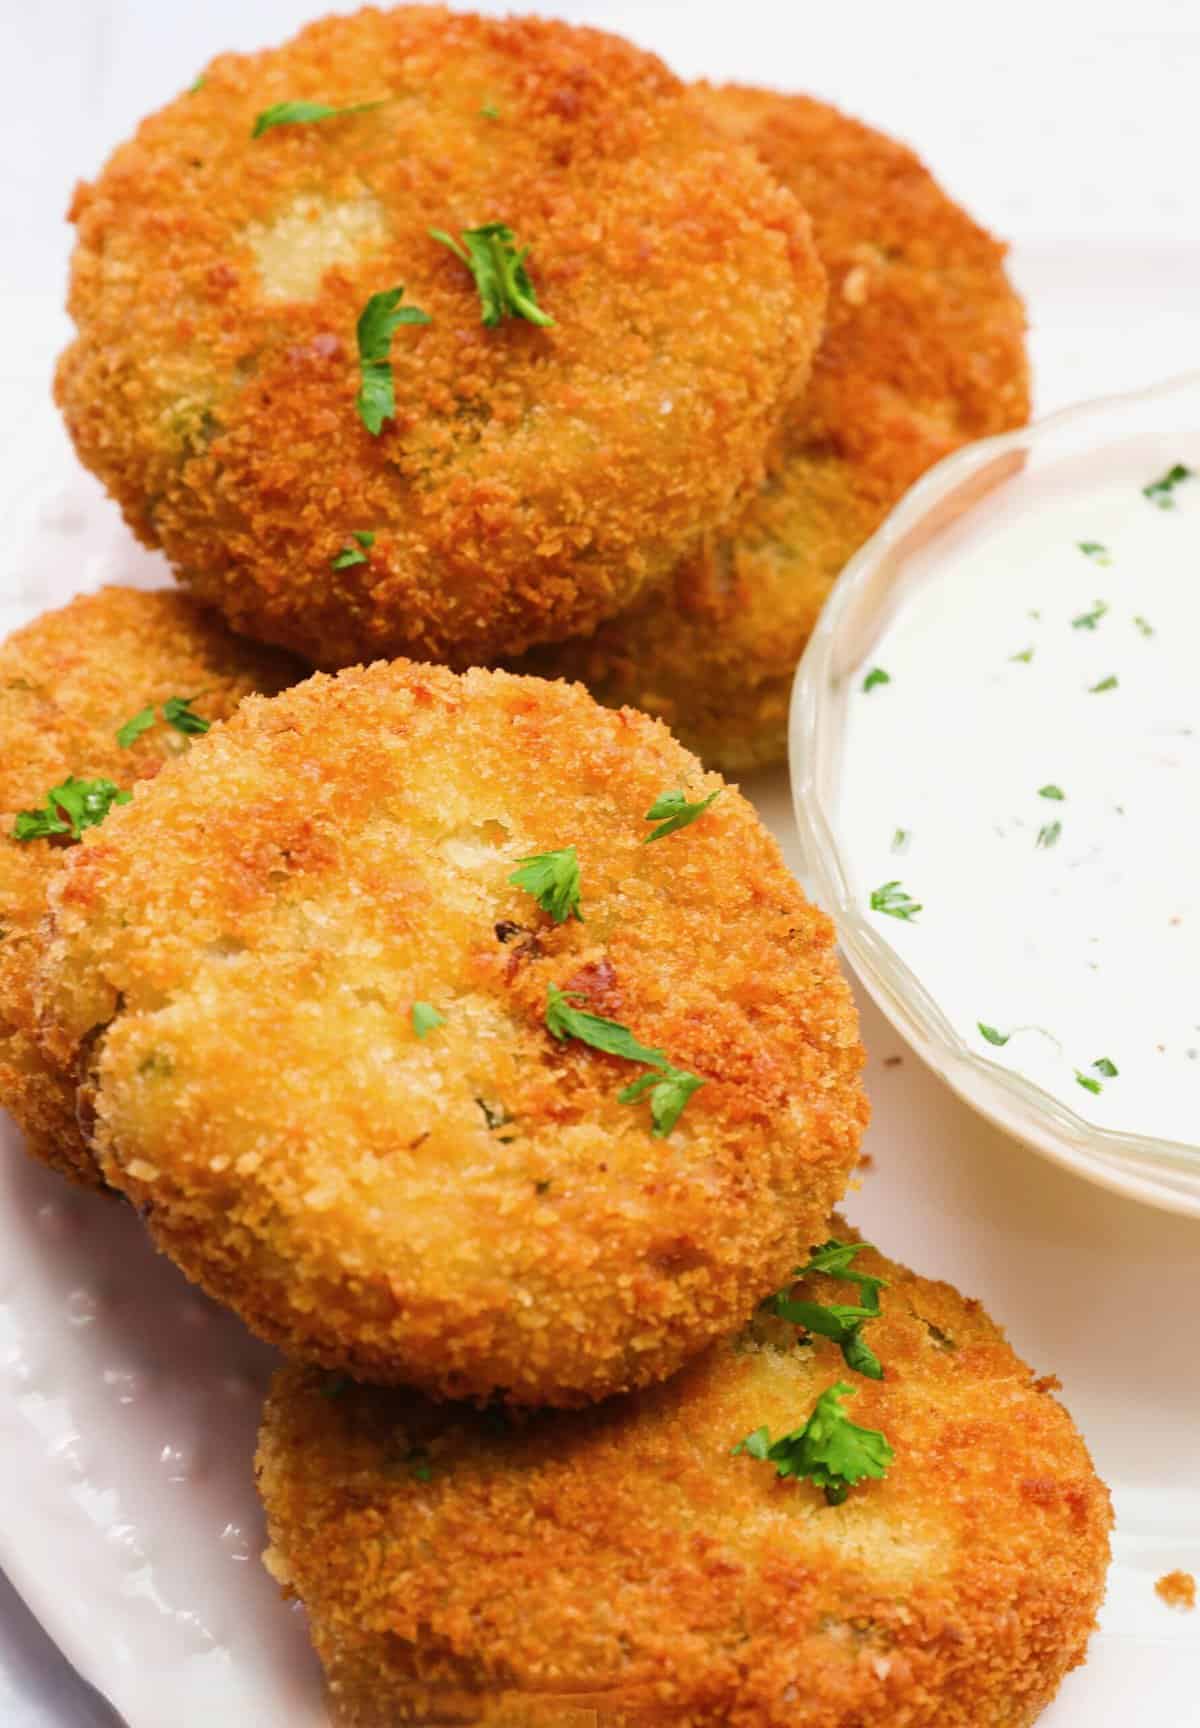 Serving tasty fish cakes with homemade tartar sauce